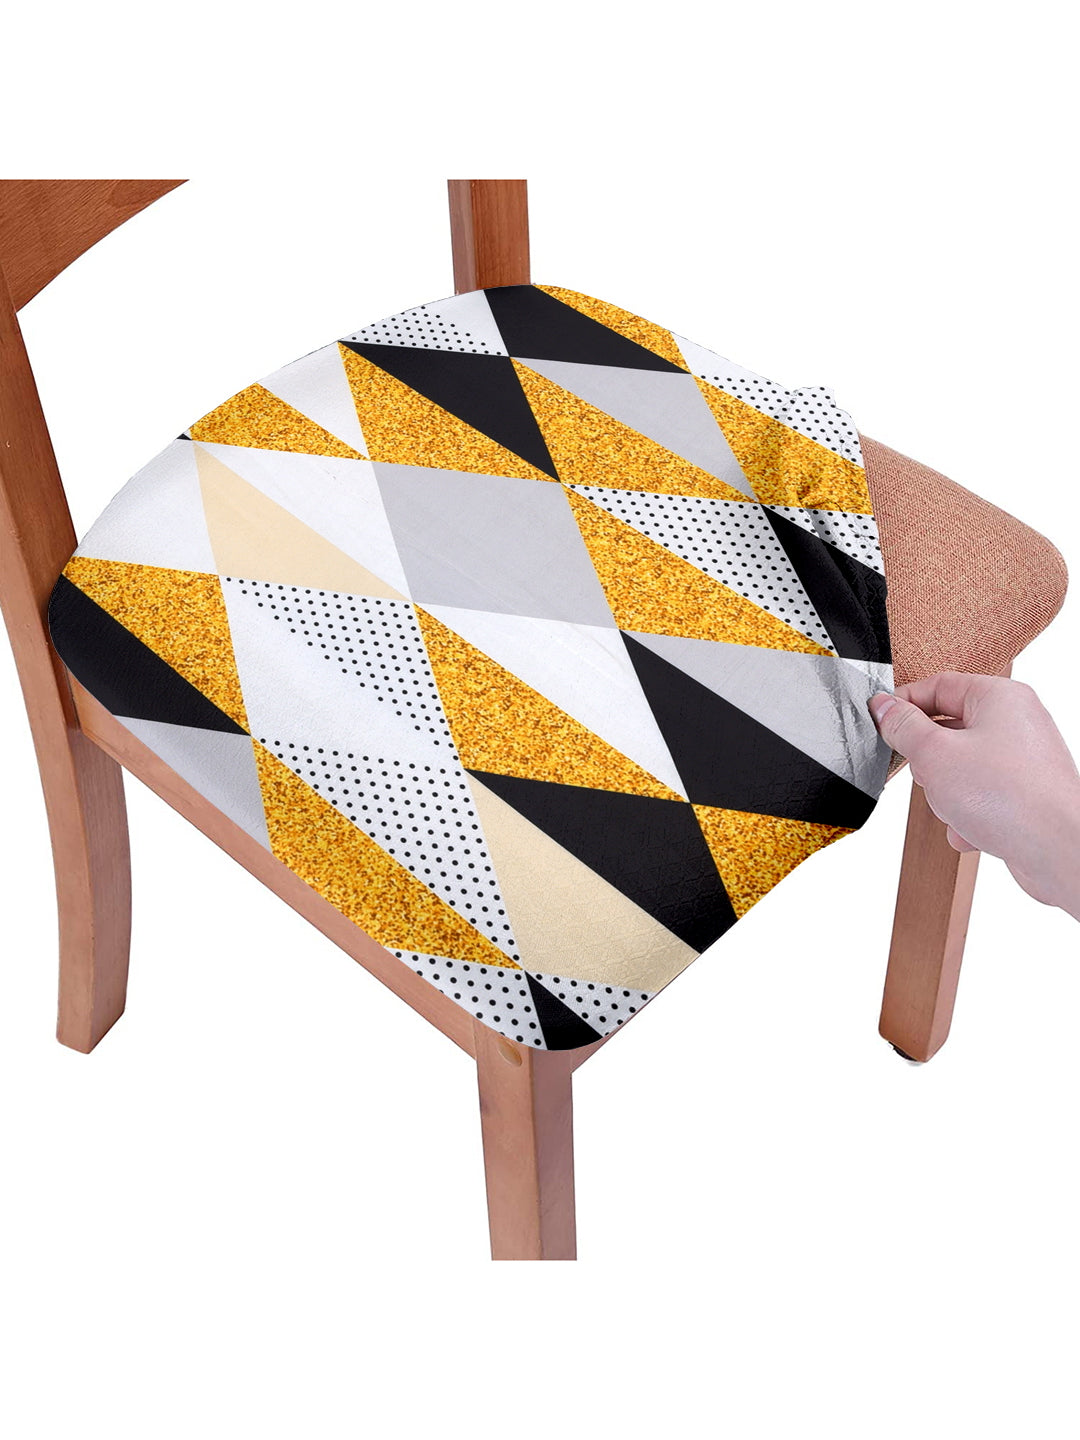 Stretchable Geometric Printed Non Slip Chair Pad Cover Pack of 1- Yellow